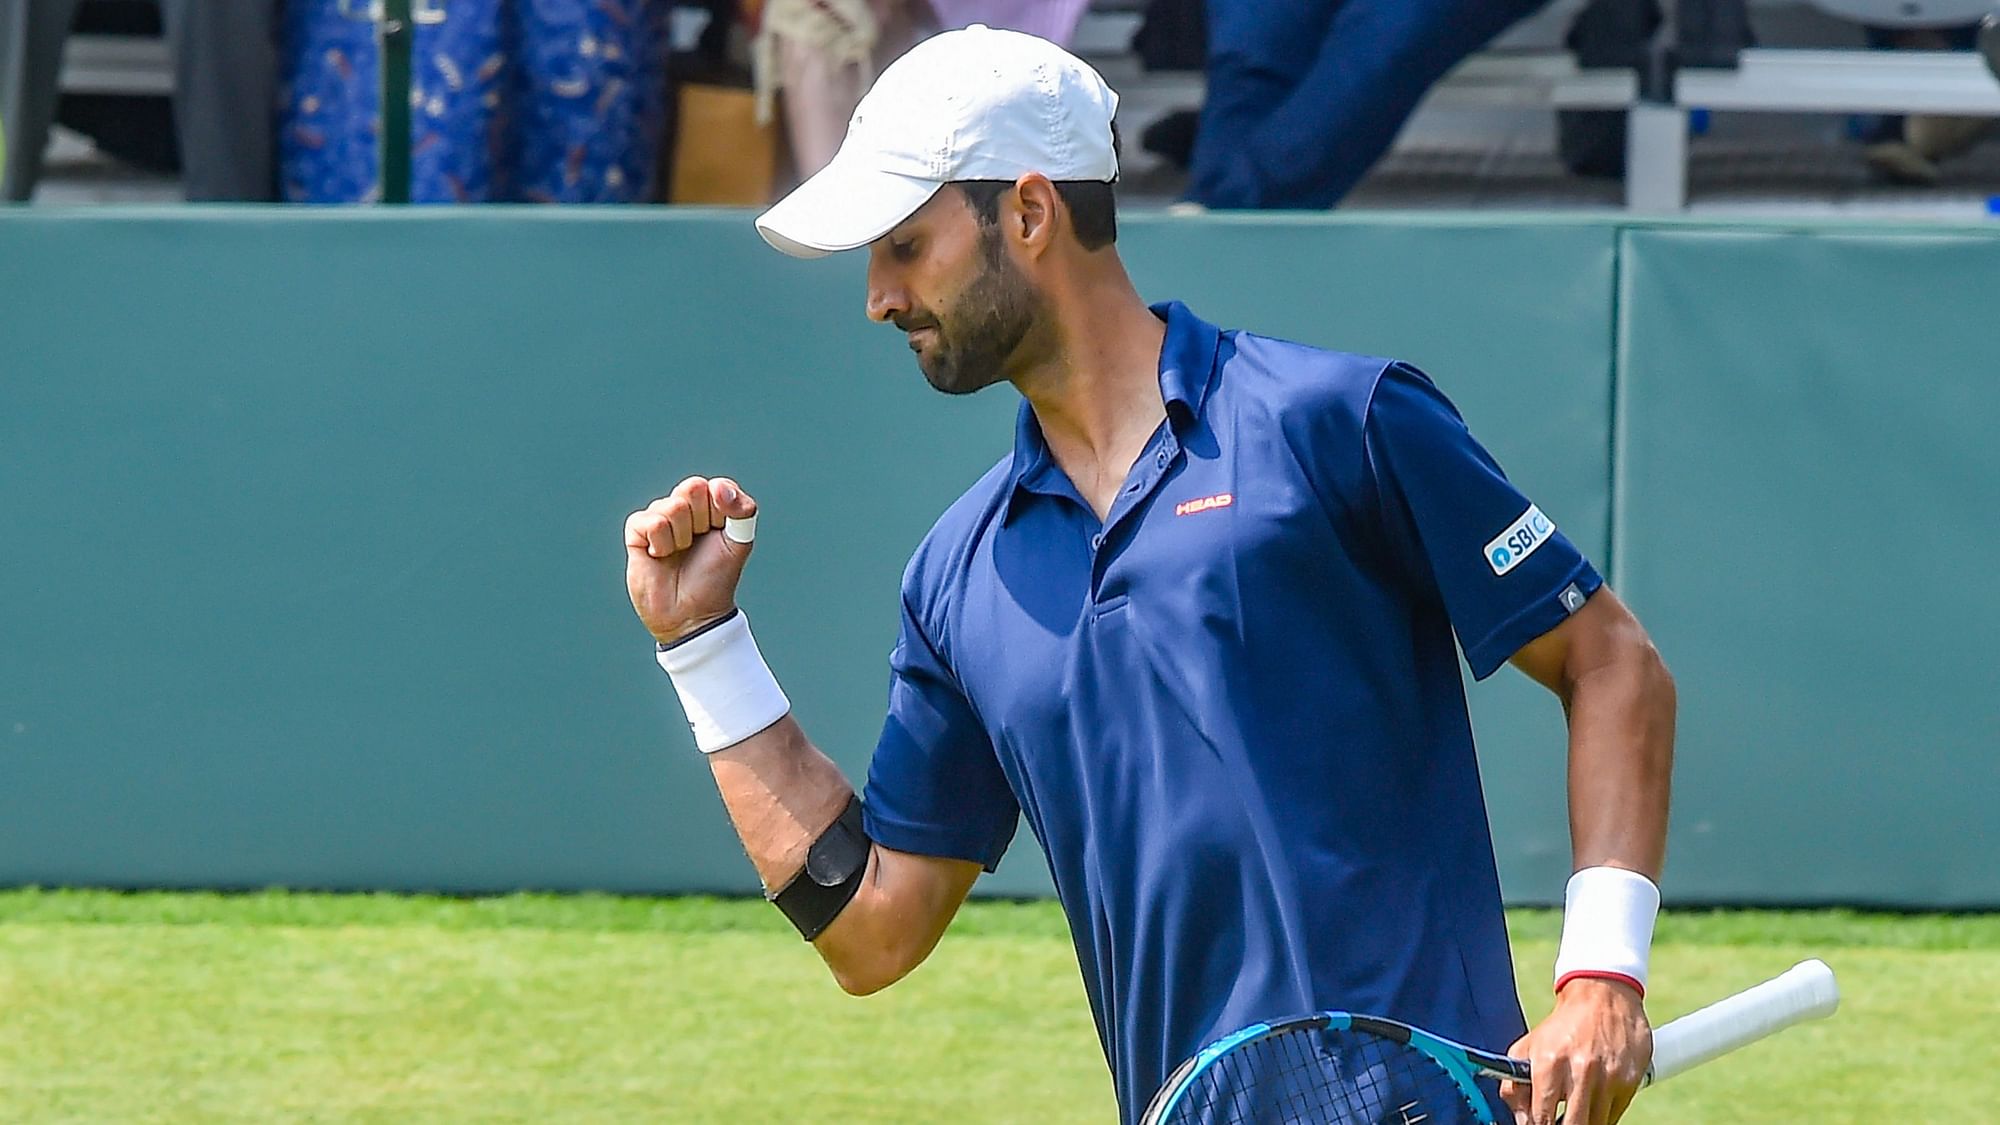 <div class="paragraphs"><p>Yuki Bhambri reacts to winning a point in the Davis Cup.</p></div>